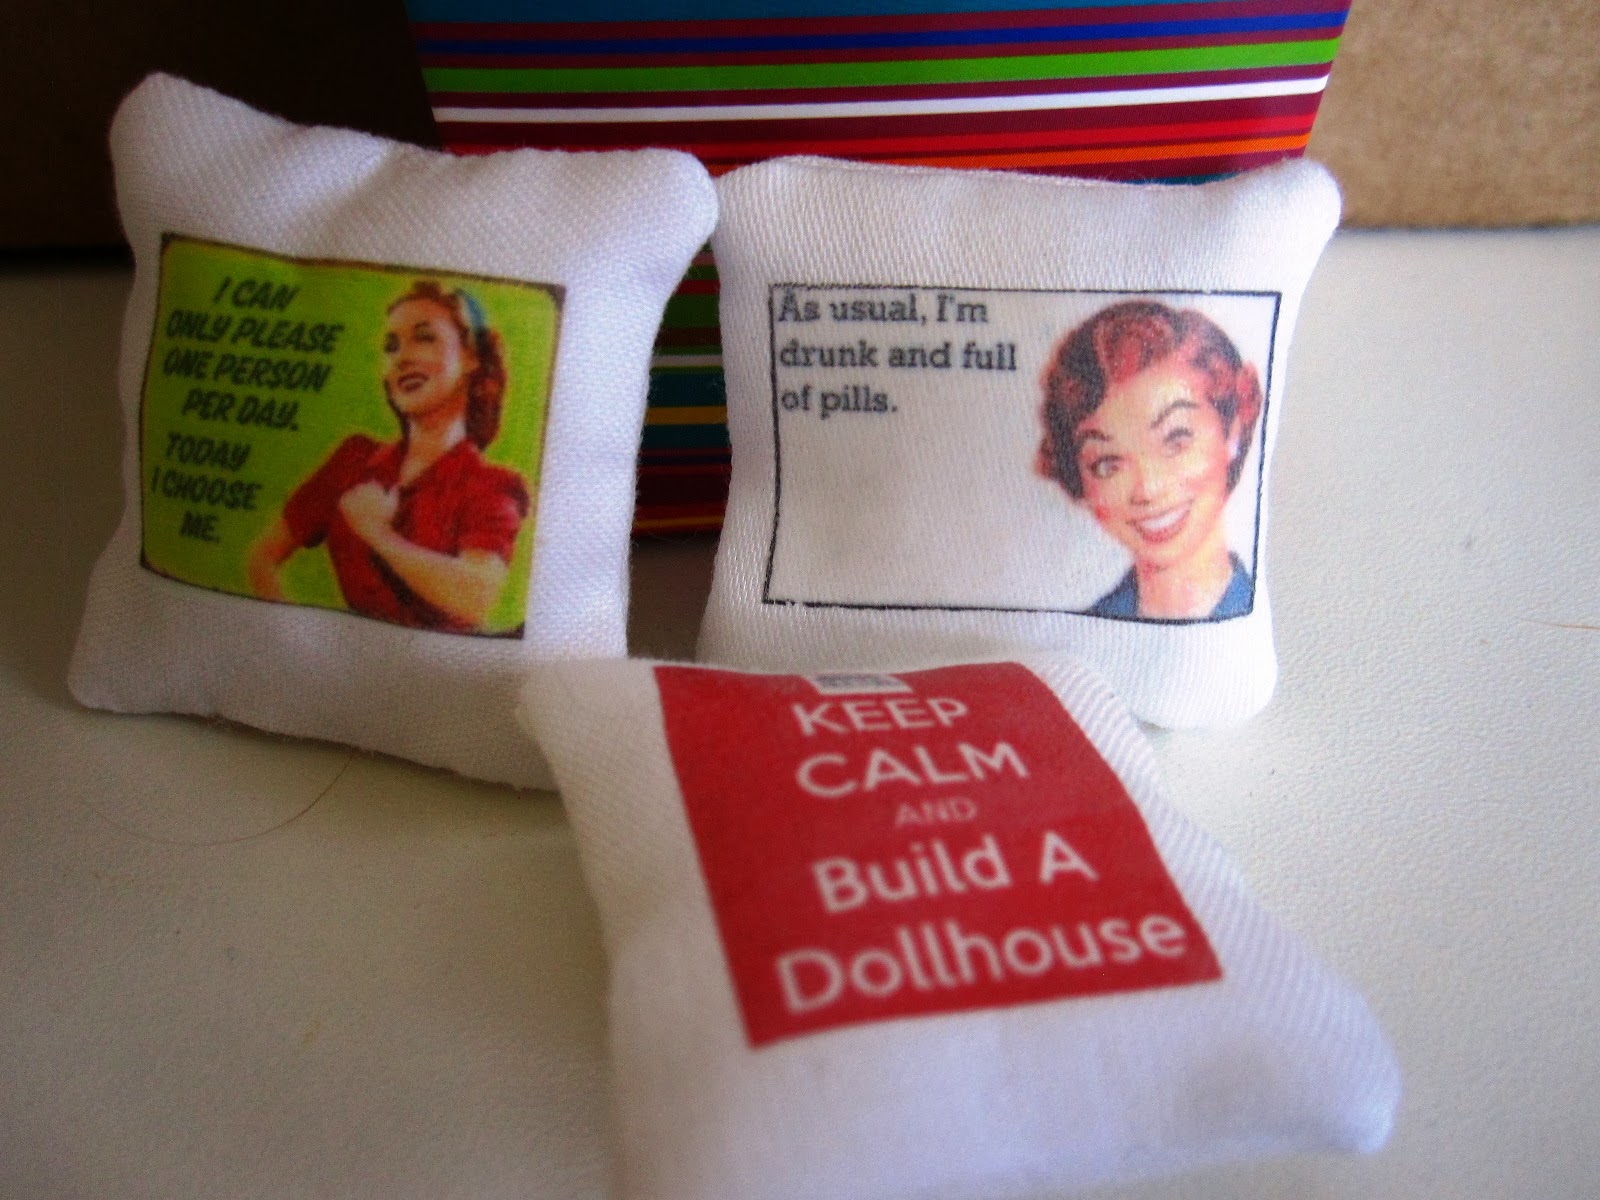 Three modern miniature cushions with funny slogans on them